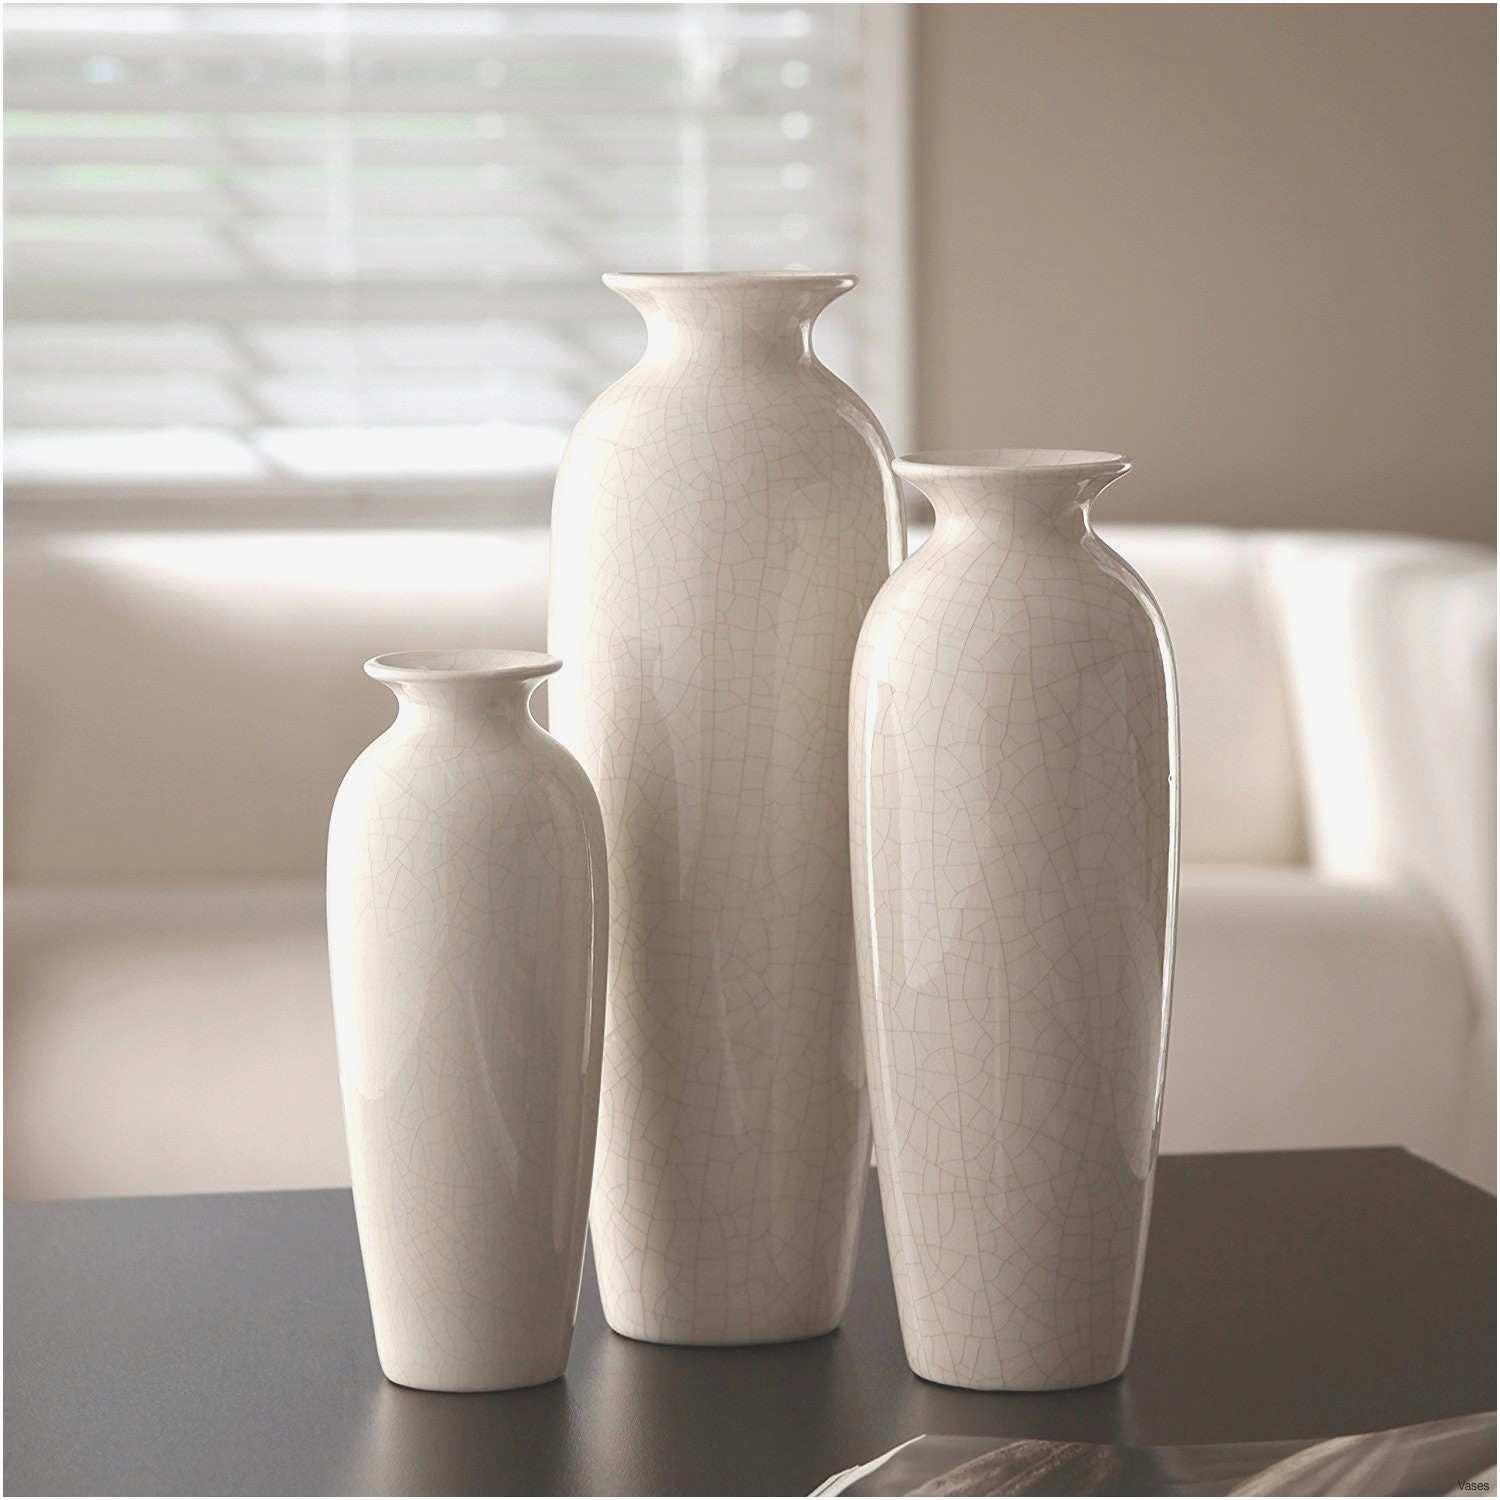 25 Nice Decorative Vases Set Of 3 2024 free download decorative vases set of 3 of 31 modern vase and gift the weekly world with regard to 31 modern vase and gift